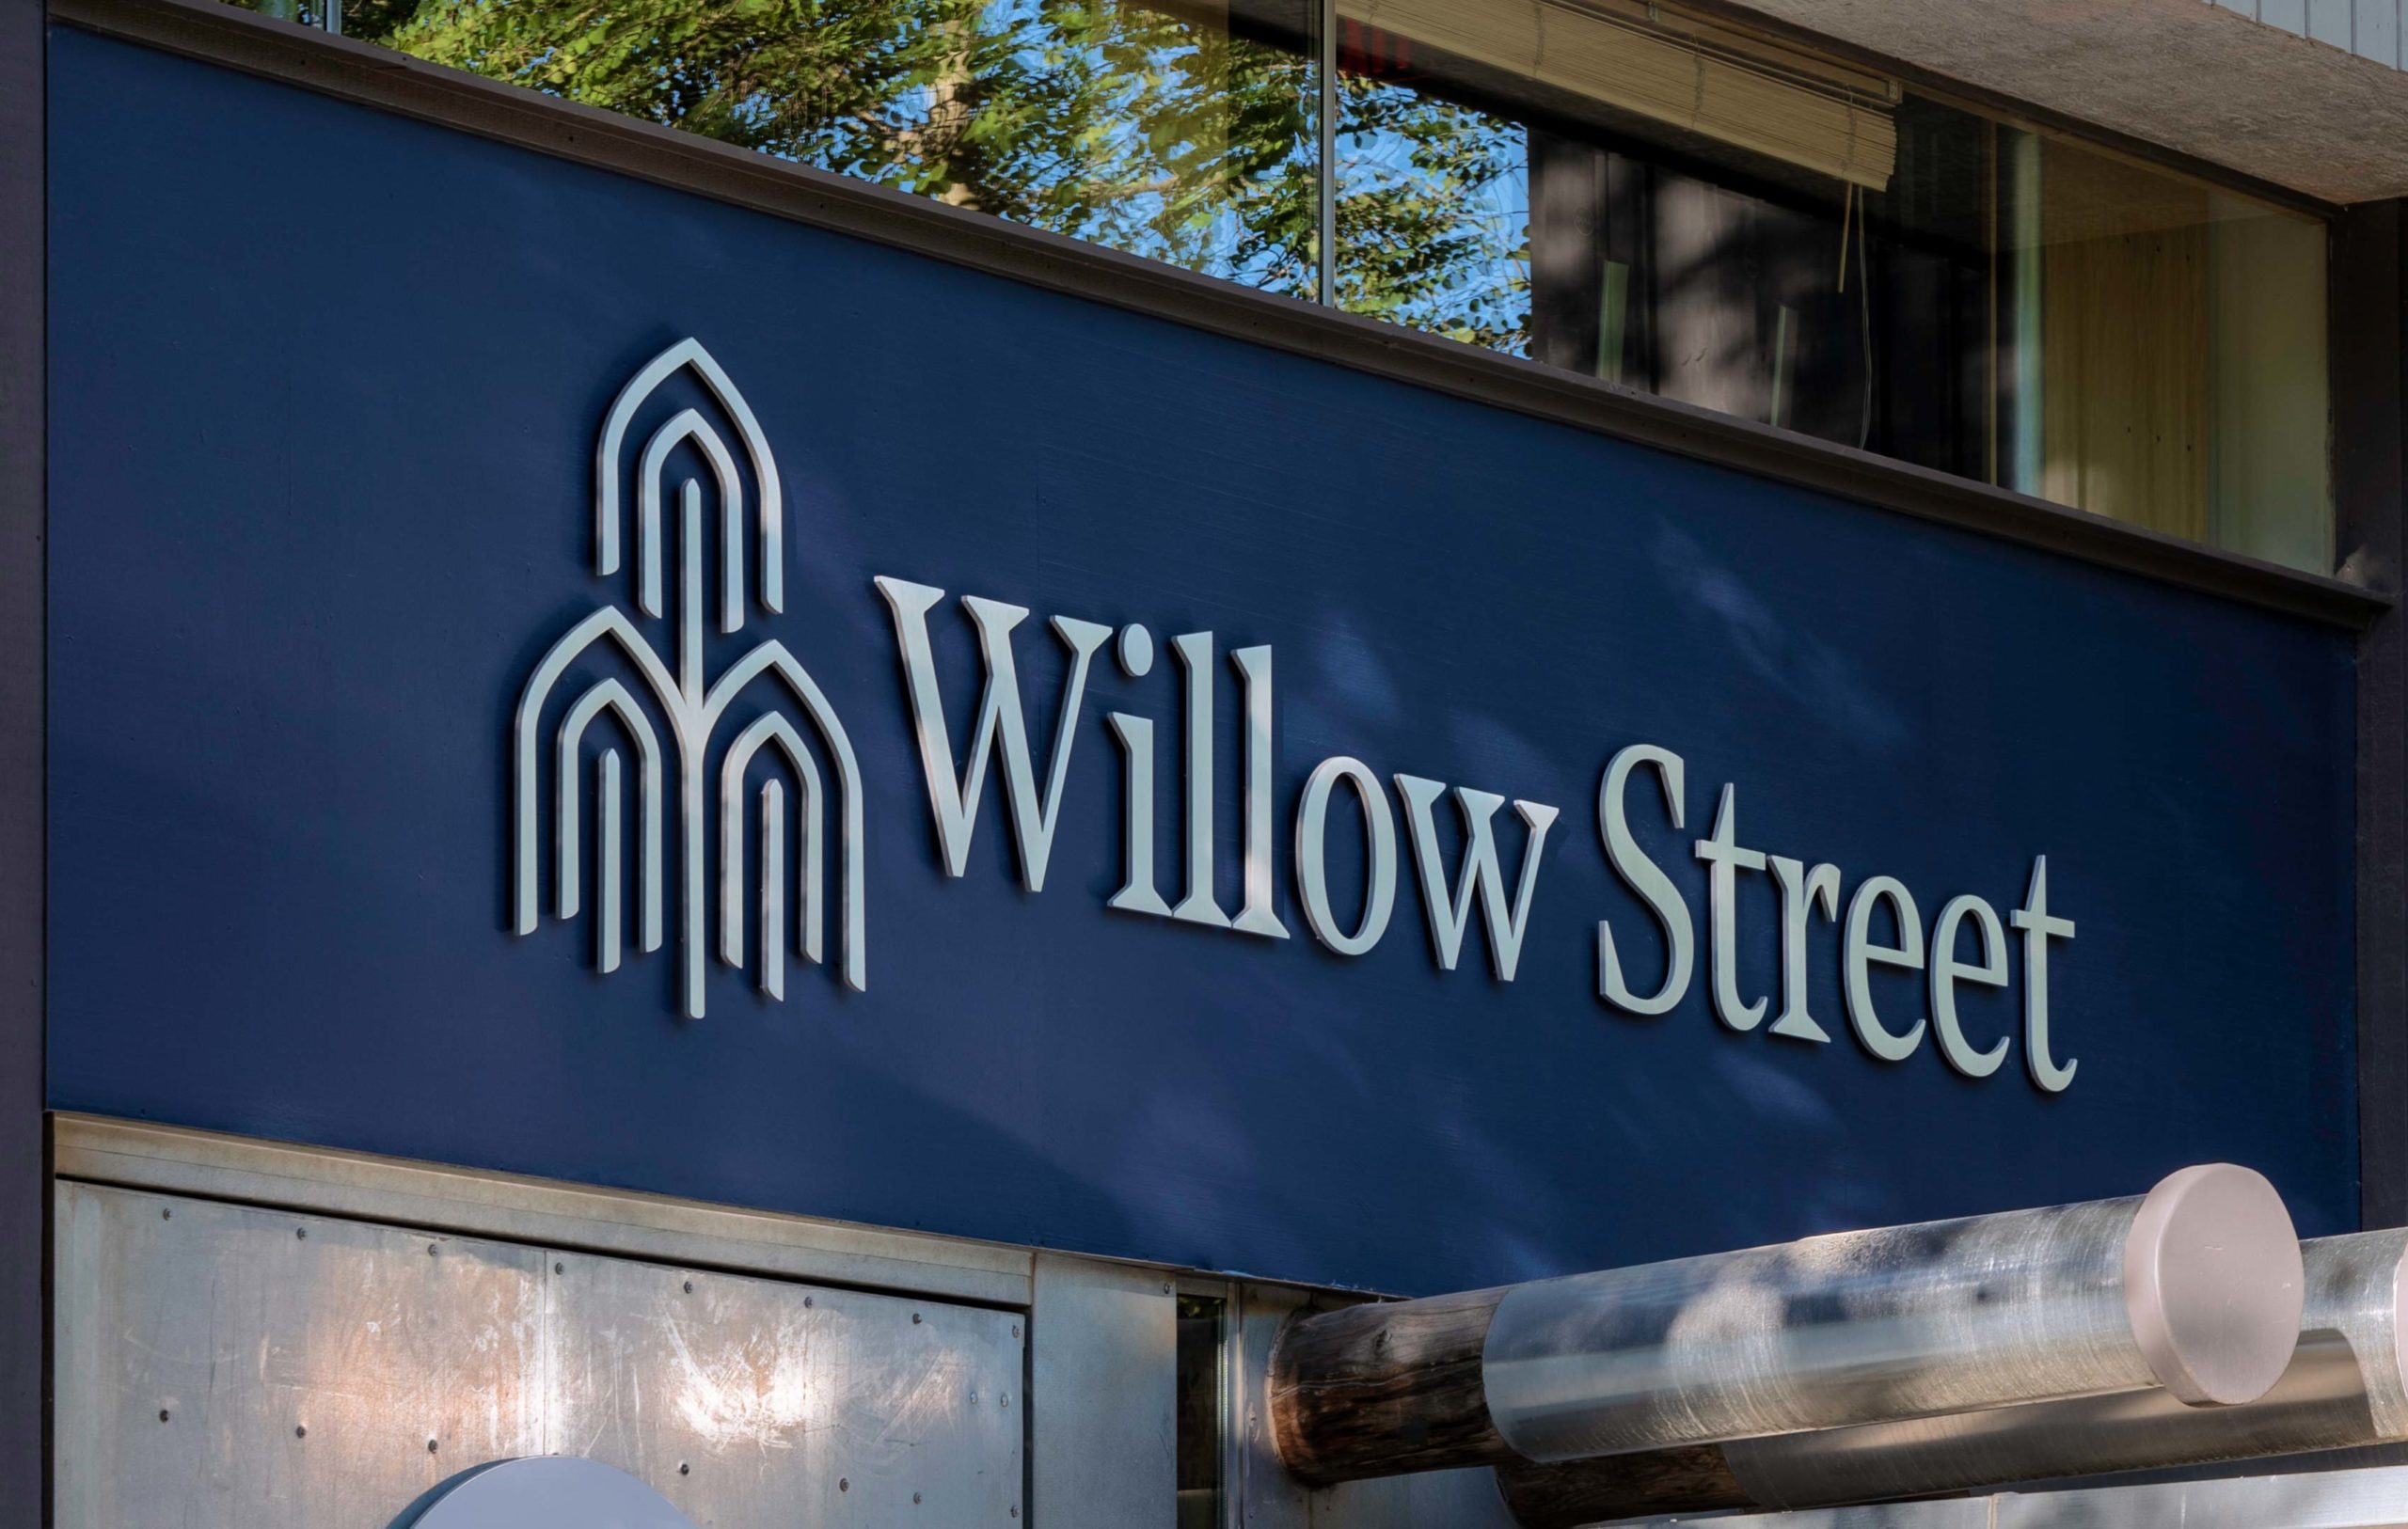 New-Thought-Willow-Street-Group-Building-Signage-Close-Up-fullscreen